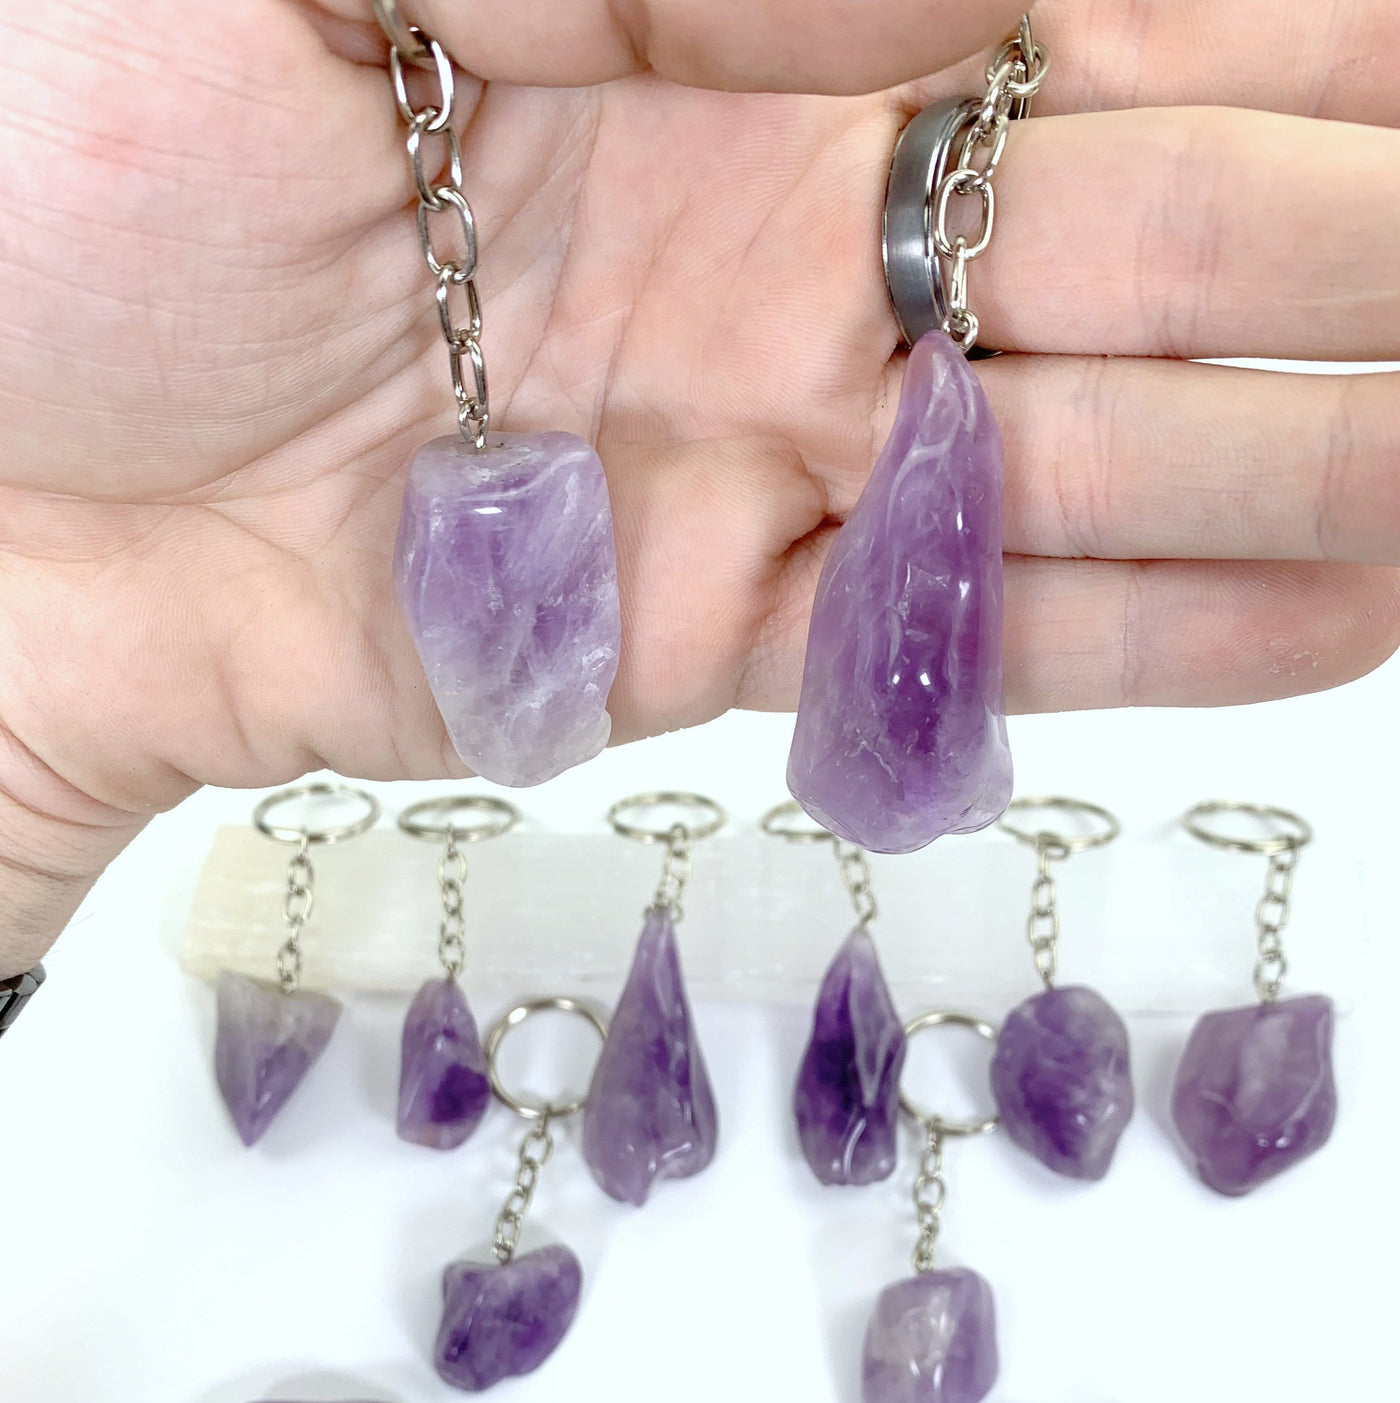 olished Amethyst Keychains with silver links and ring hoop displayed to show color and characteristic variations in hand